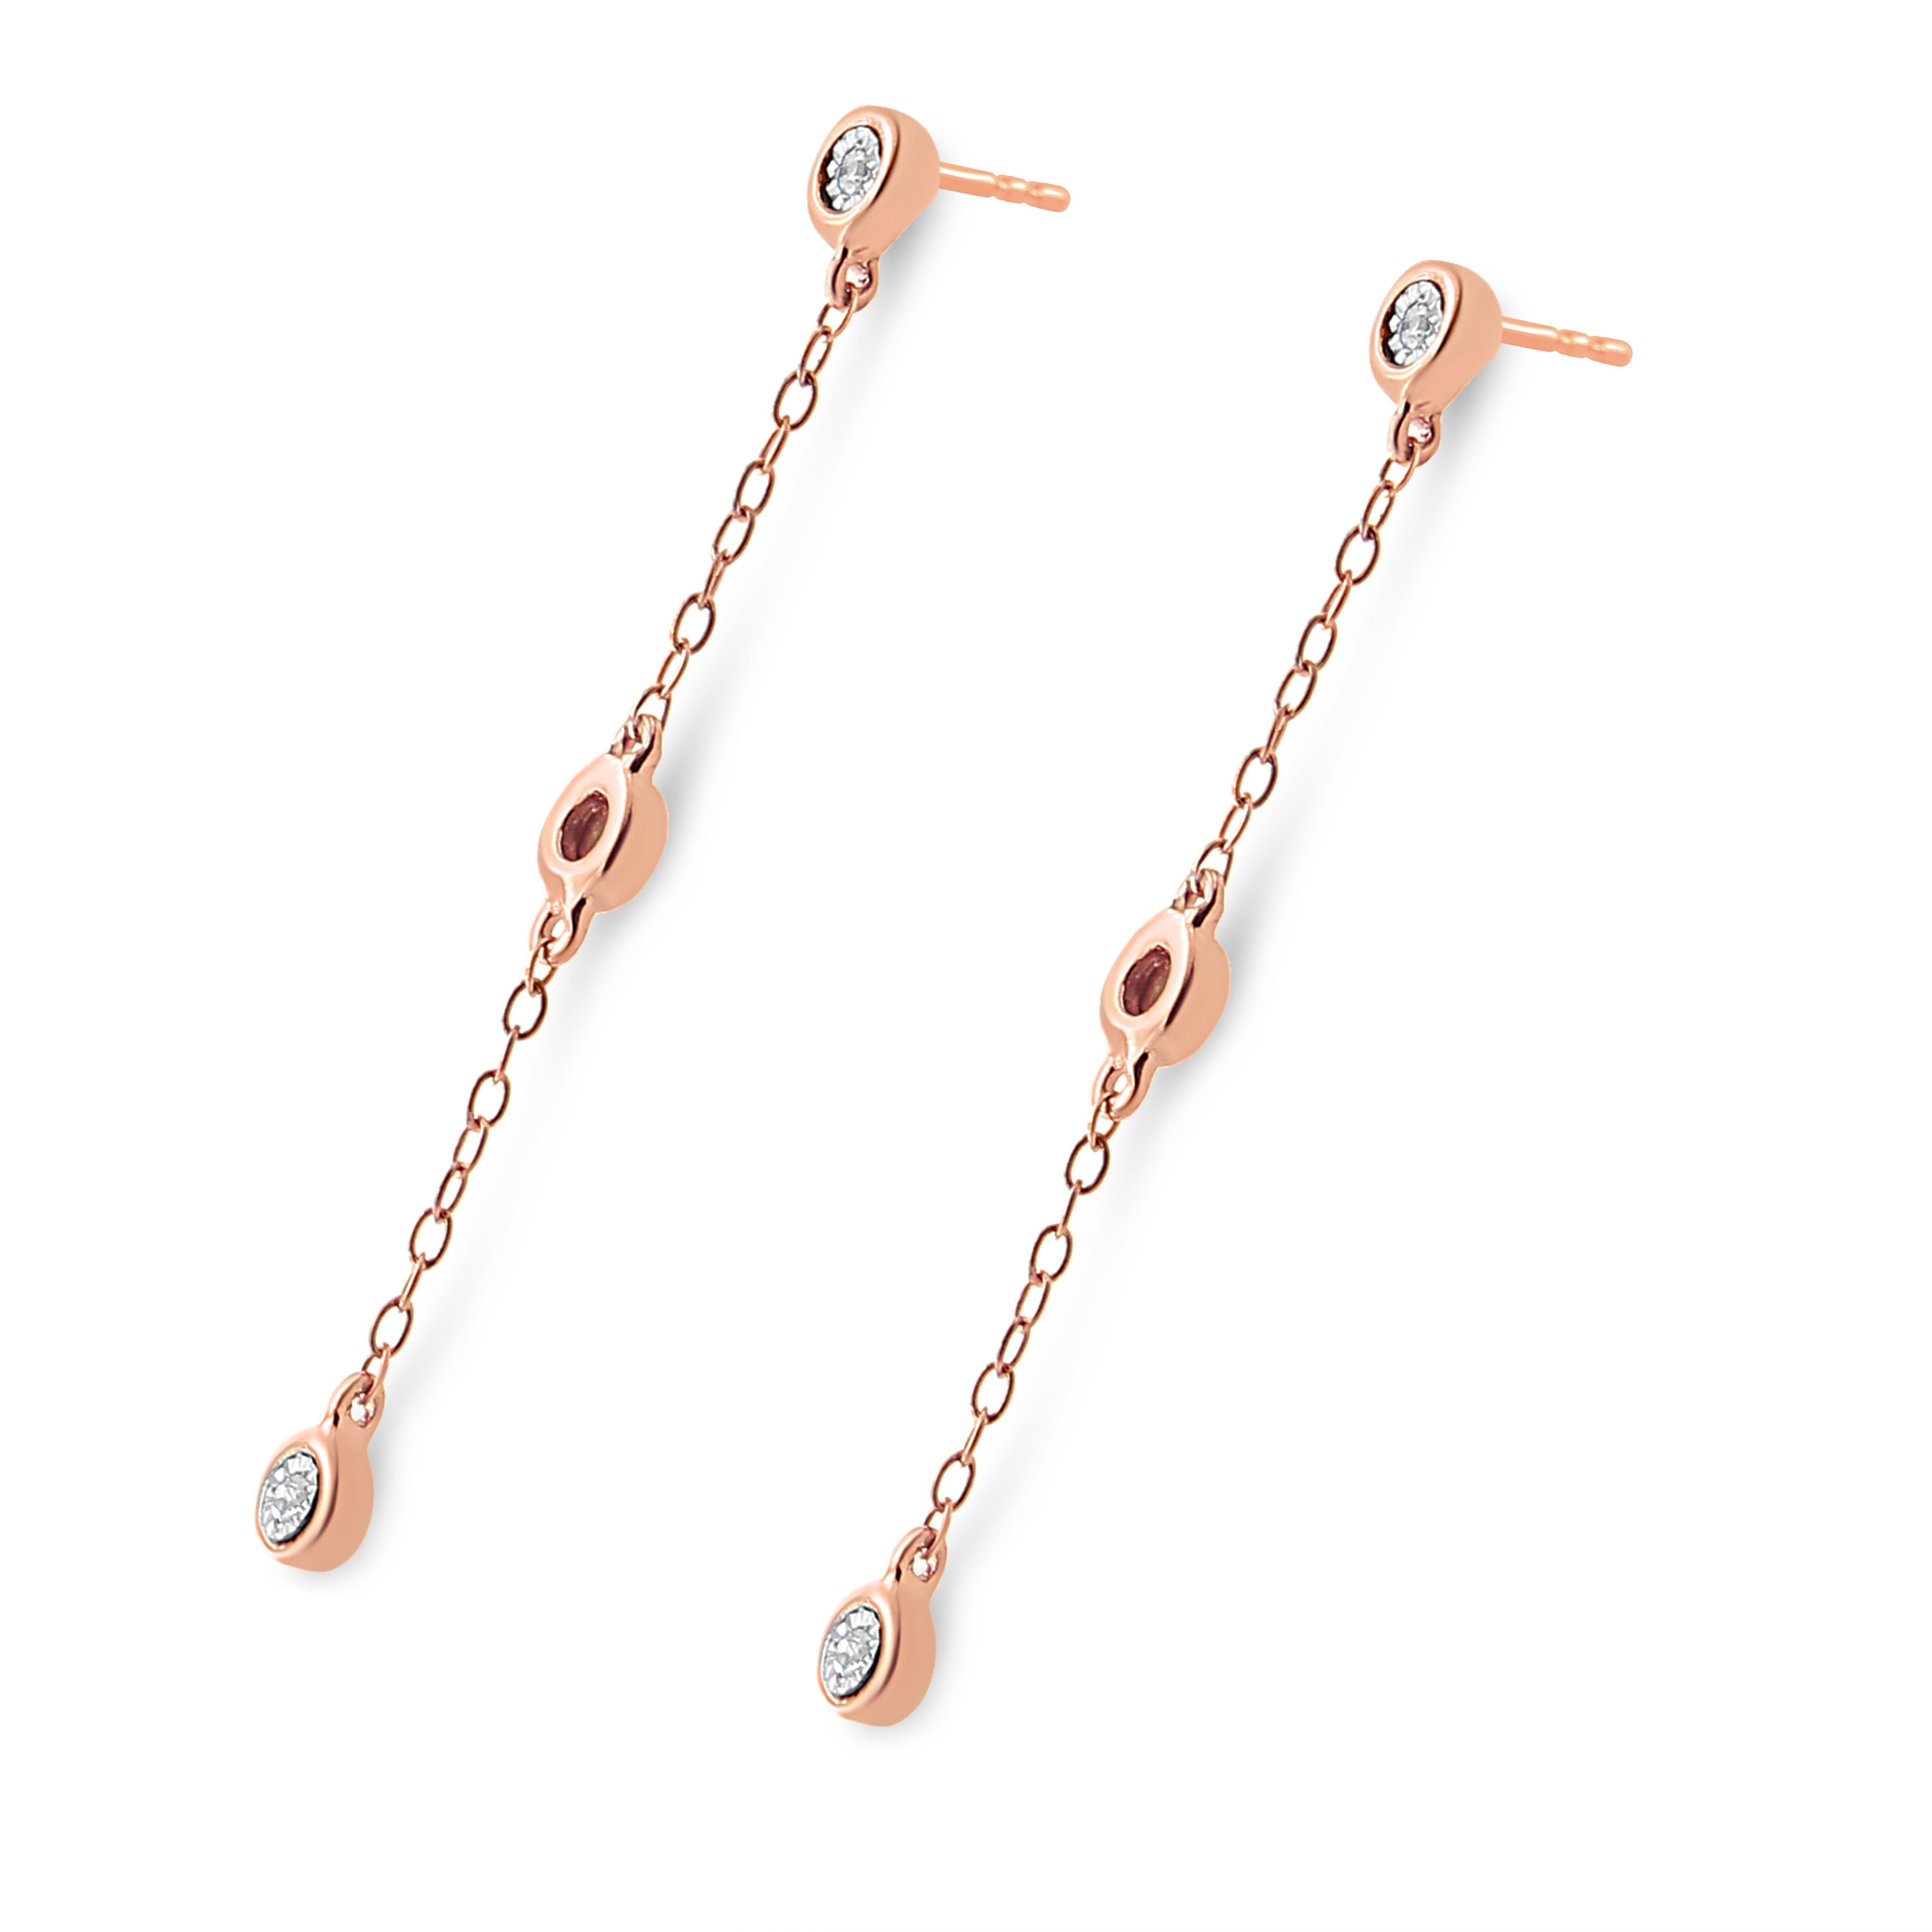 Treat yourself to these lovely and petite 10k rose gold plated .925 sterling silver dangle earrings. Each earring is set with 3 natural, round-cut diamonds in a miracle setting evenly spread out down. The diamonds have a total carat weight of 1/15